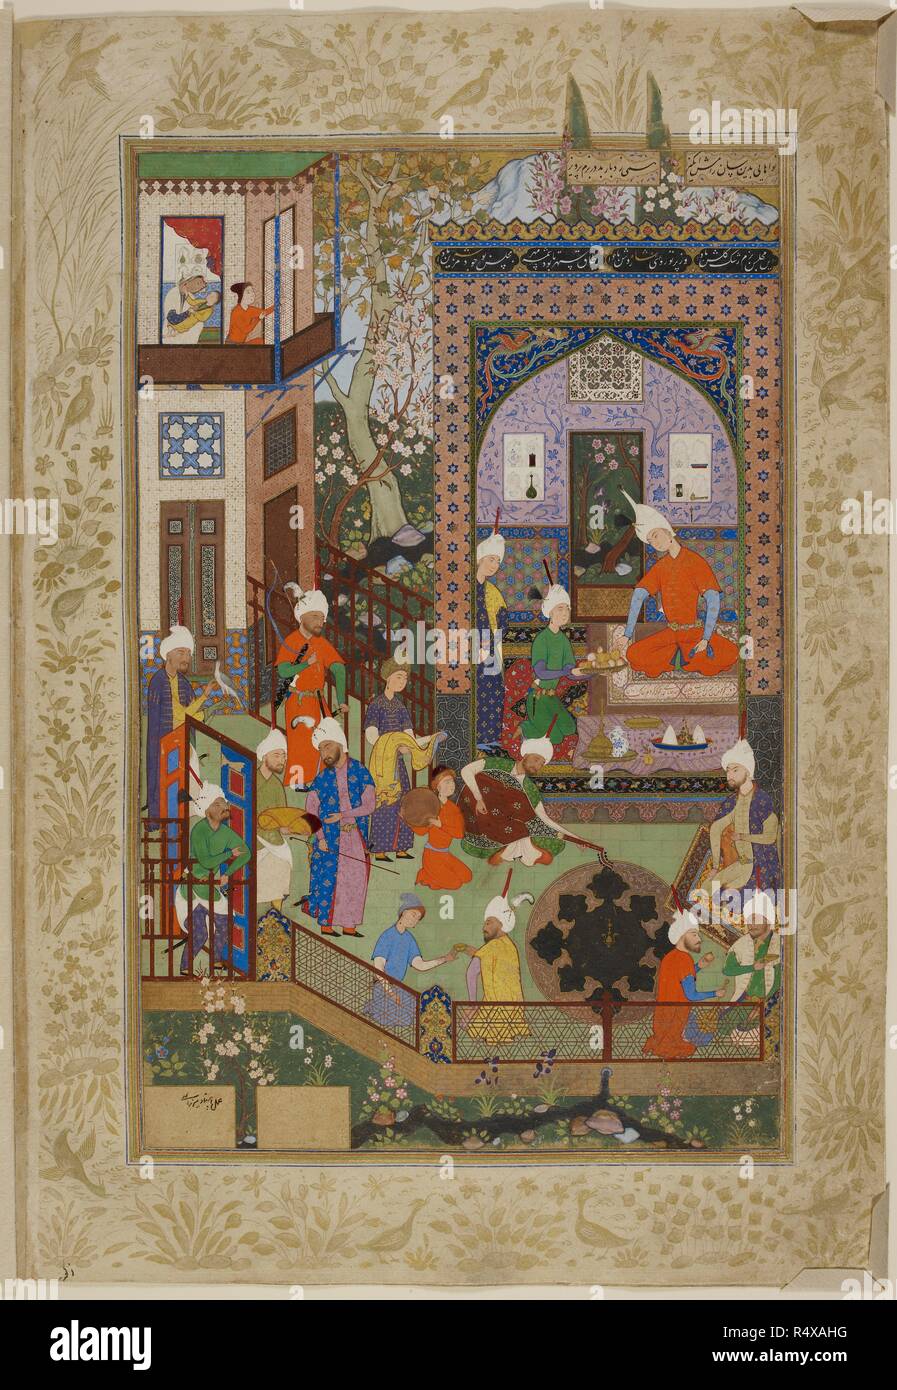 Khusrau listening to Barbad playing the lute. (Inscription: over pavilion â€˜May this festive assembly be as rain to the garden and may the light of the countenance of the Shah be bright. From the dome of the heavens, as long as the sun and the moon exist, may the assembly be adorned with the person of the Shahâ€™. Round the carpet: â€˜With the furnishing of your two eyes you make a bridal chamber of that dwelling. In every place you travel you wish to make the dust into a road there. How pleasant . . . with one anotherâ€™). (Mirza â€˜Ali). Khamsa by Nizami. Borders decorated with designs in g Stock Photo